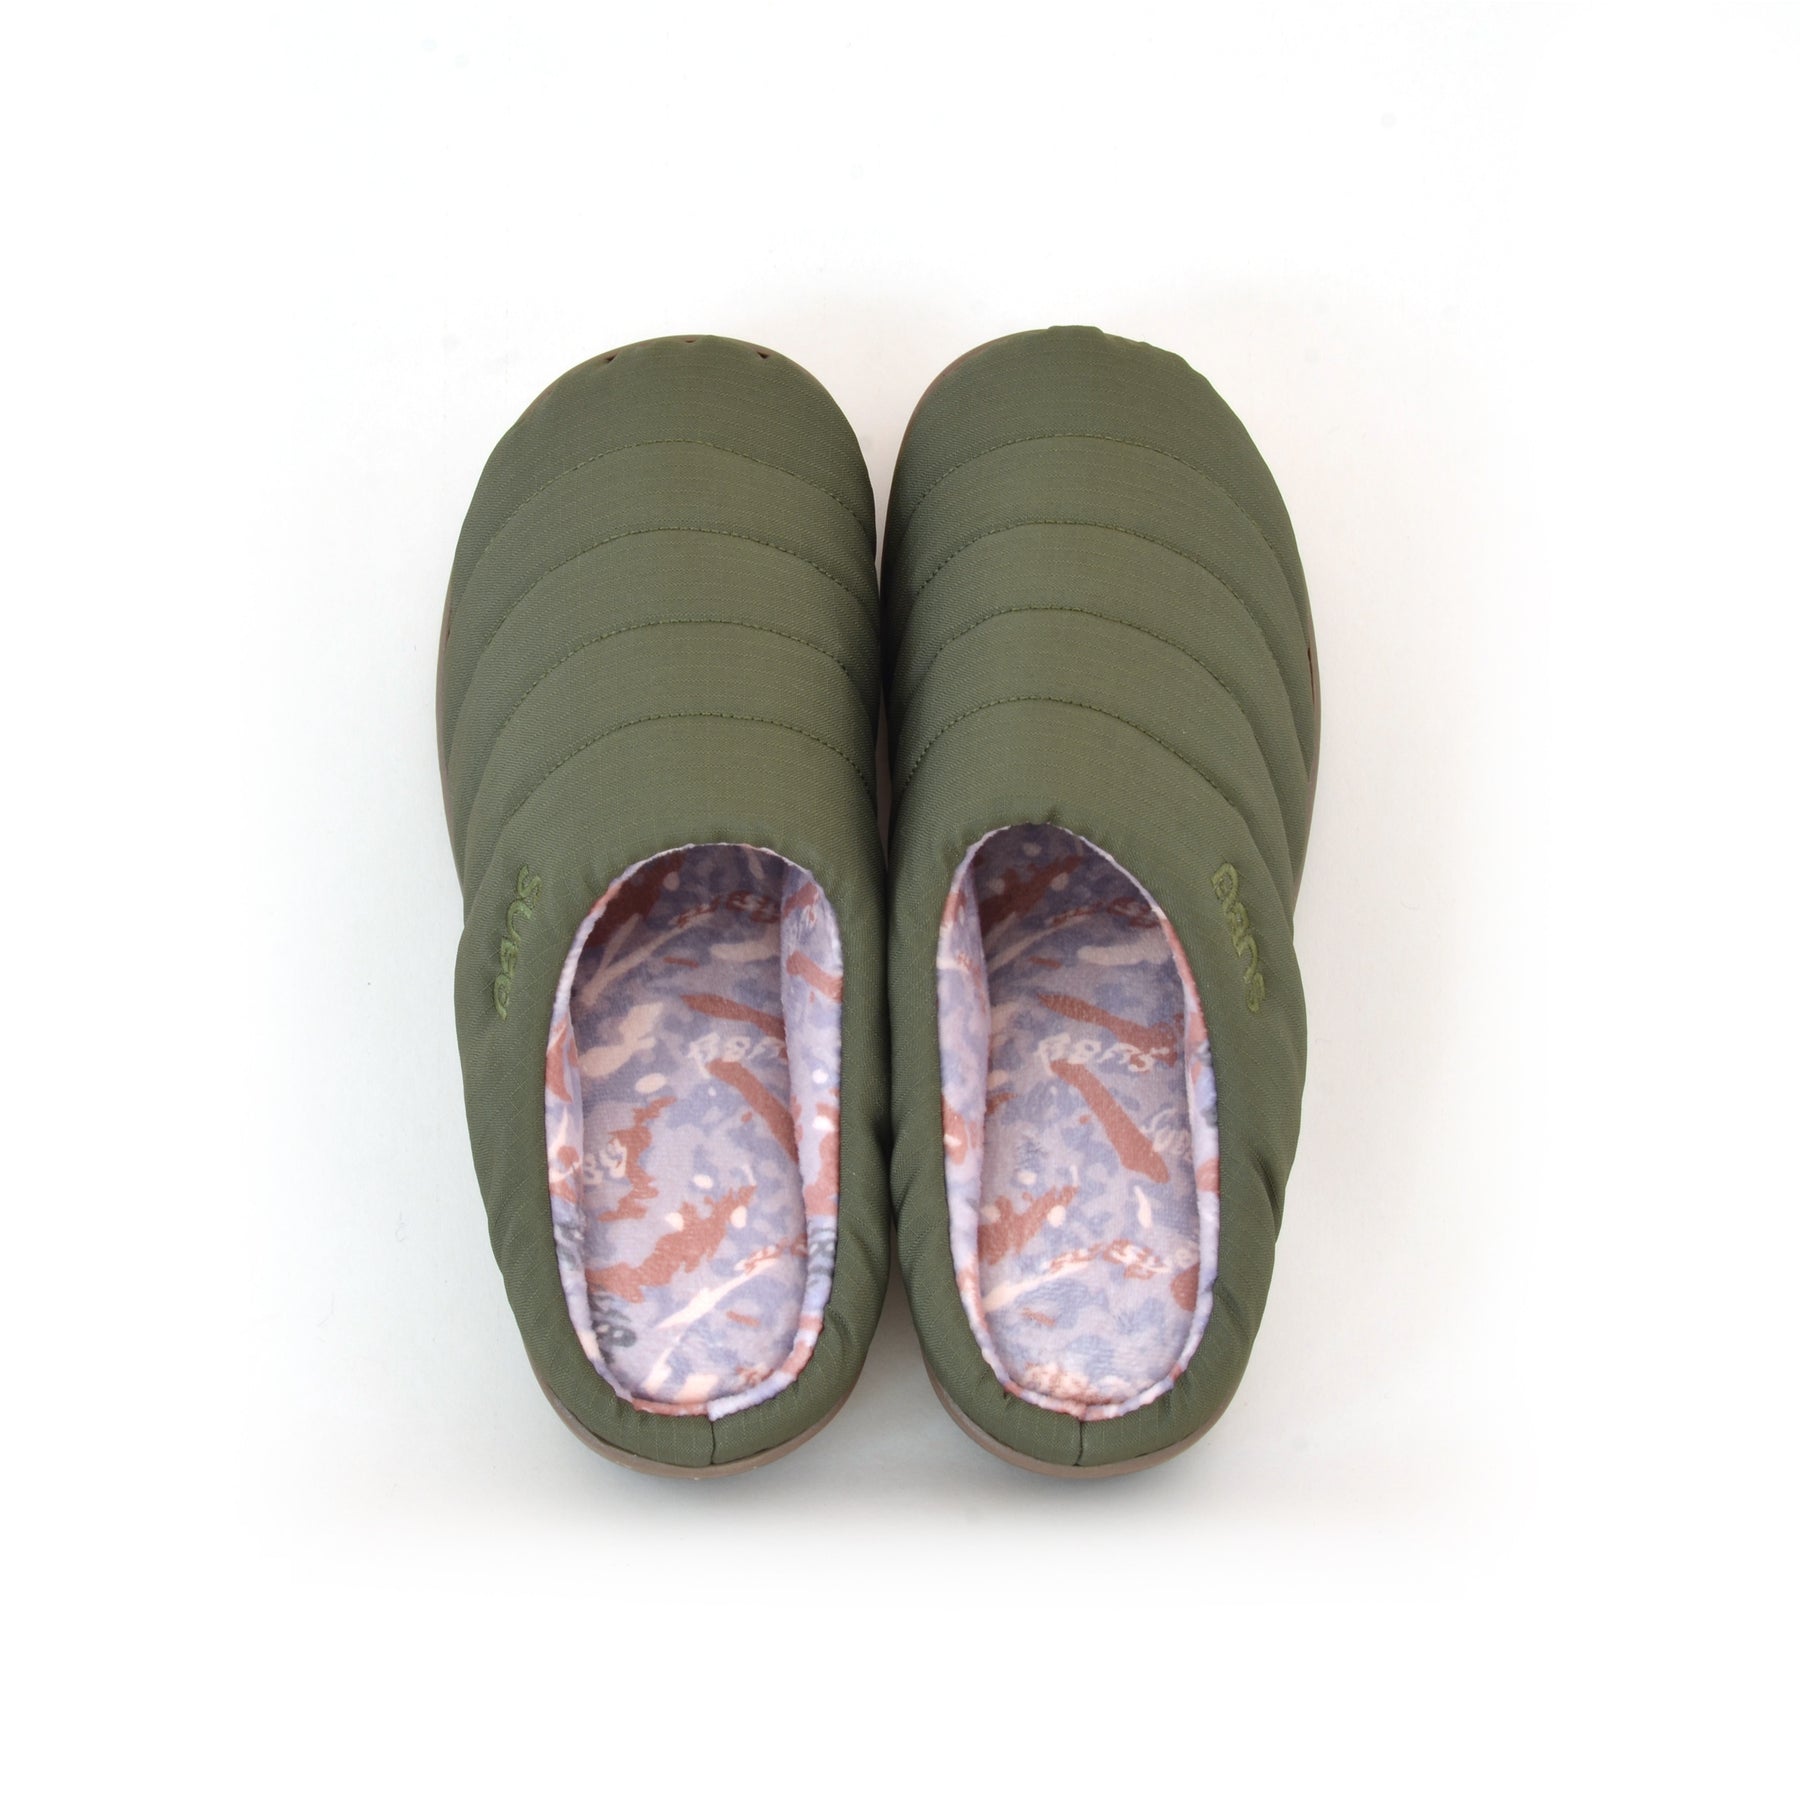 Nannen Outdoor Slippers - Olive Drab